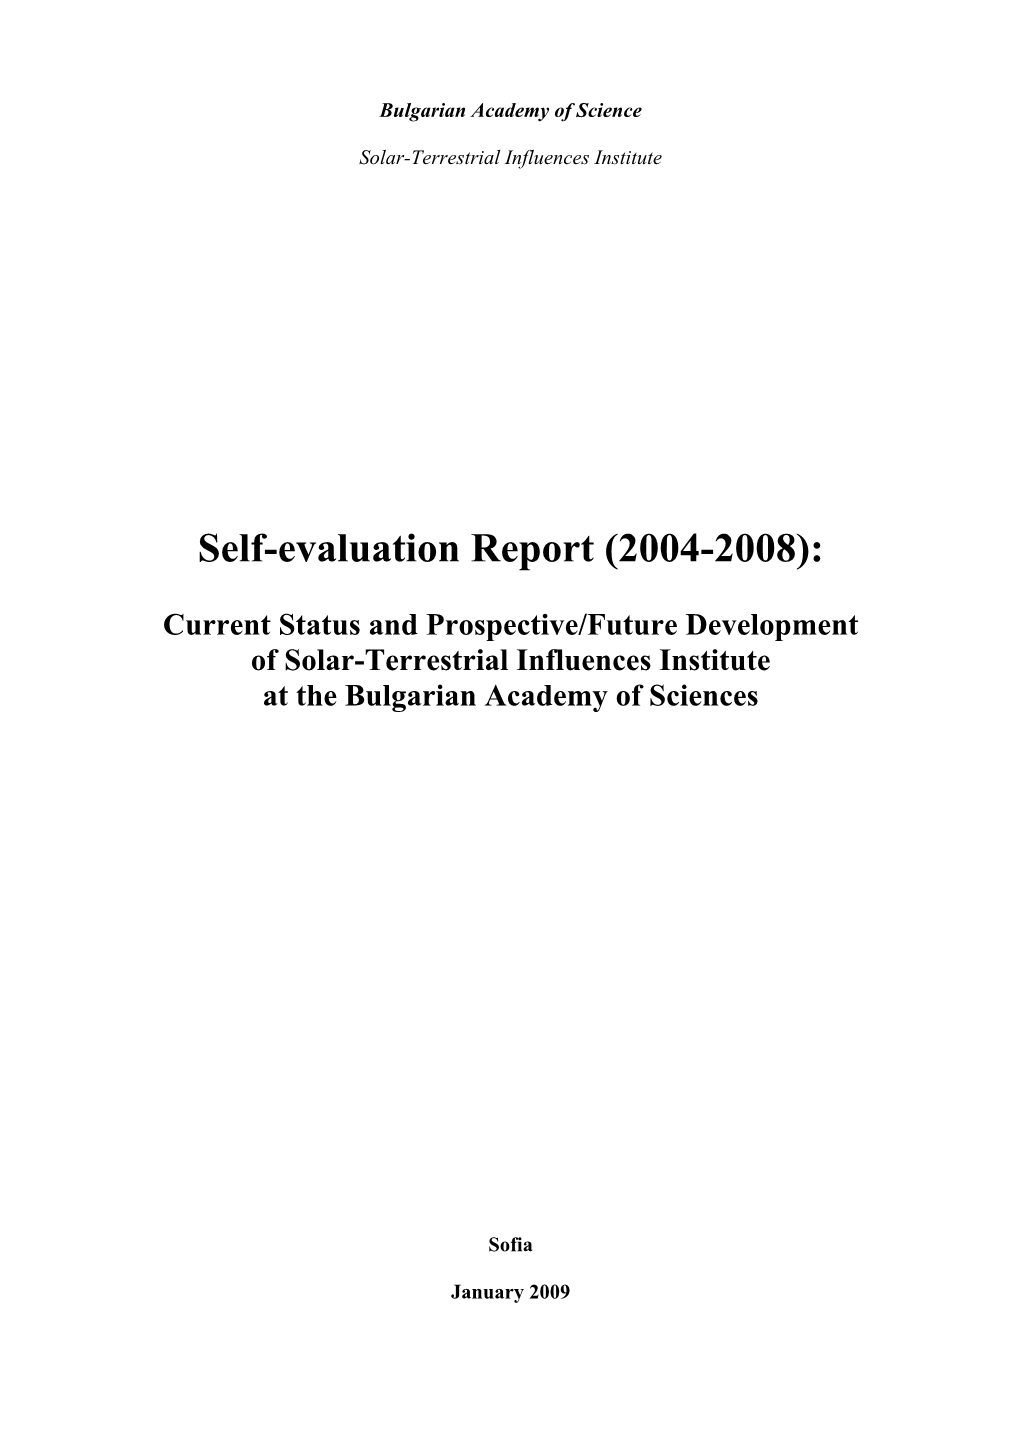 Self-Evaluation Report: Actual Situation (Based on the Period 2004-2008)